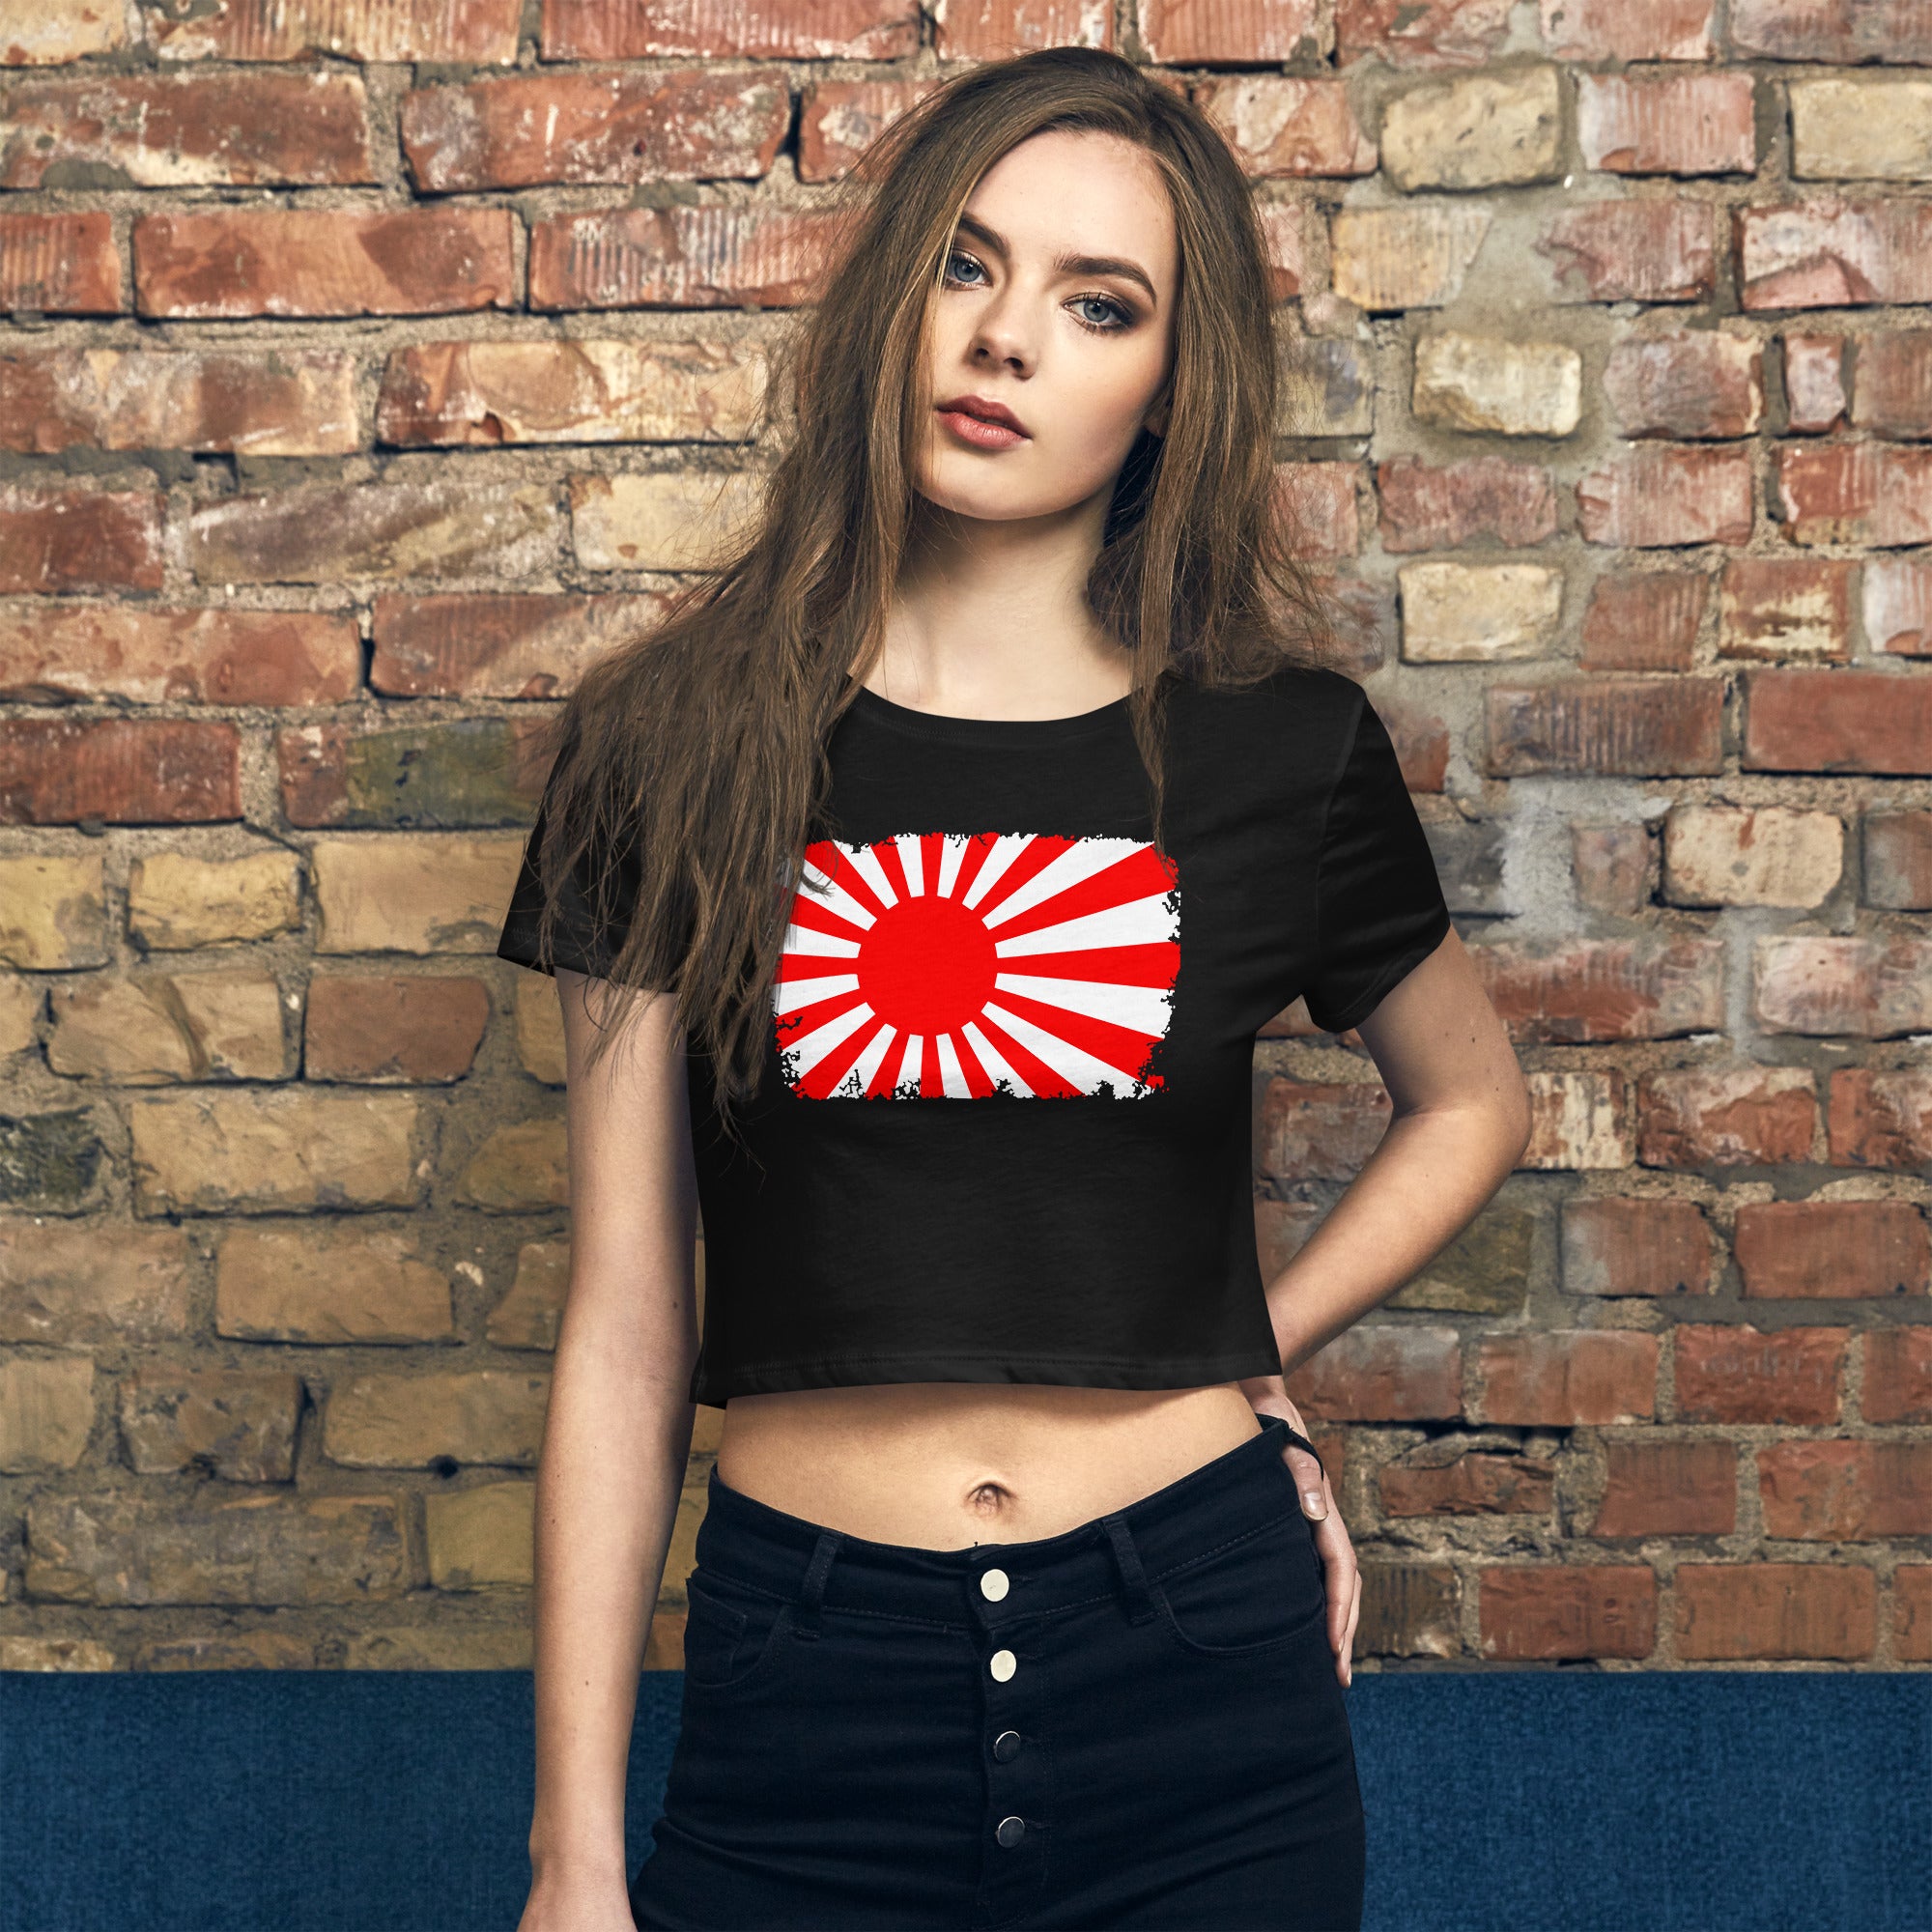 The National Flag of Japan Land of the Rising Sun Women’s Crop Tee